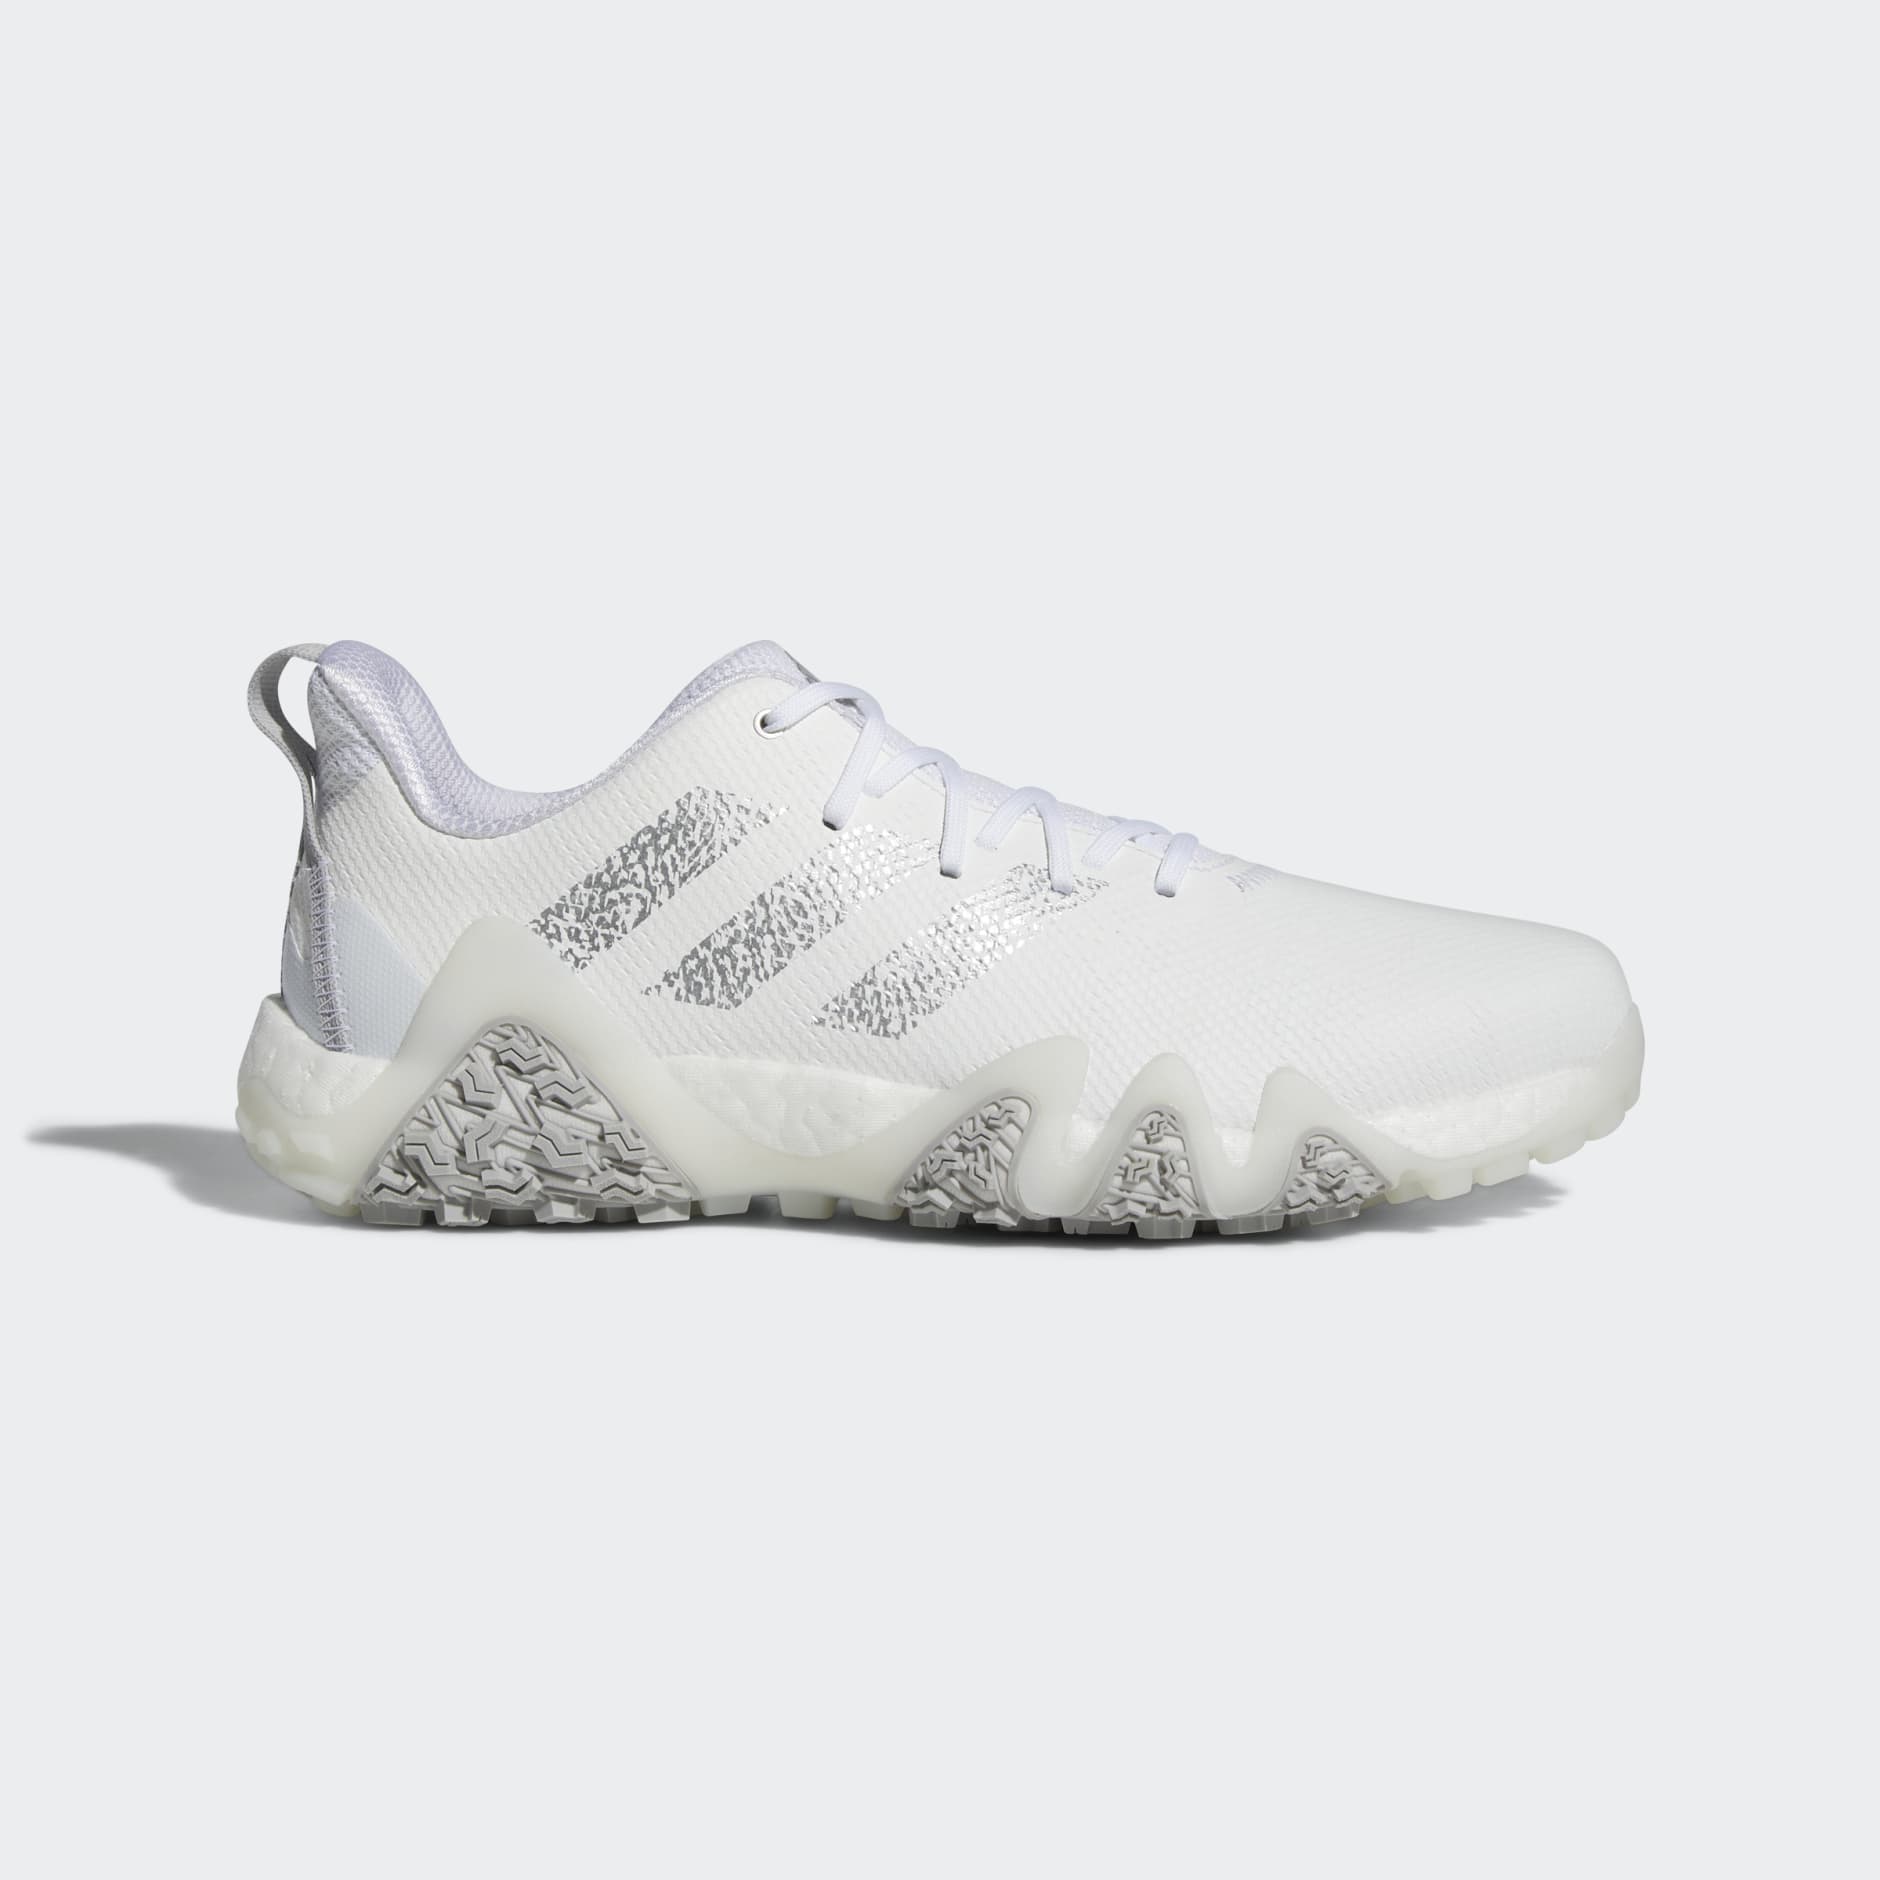 Shoes - Codechaos 22 Spikeless Golf Shoes - White | adidas South Africa